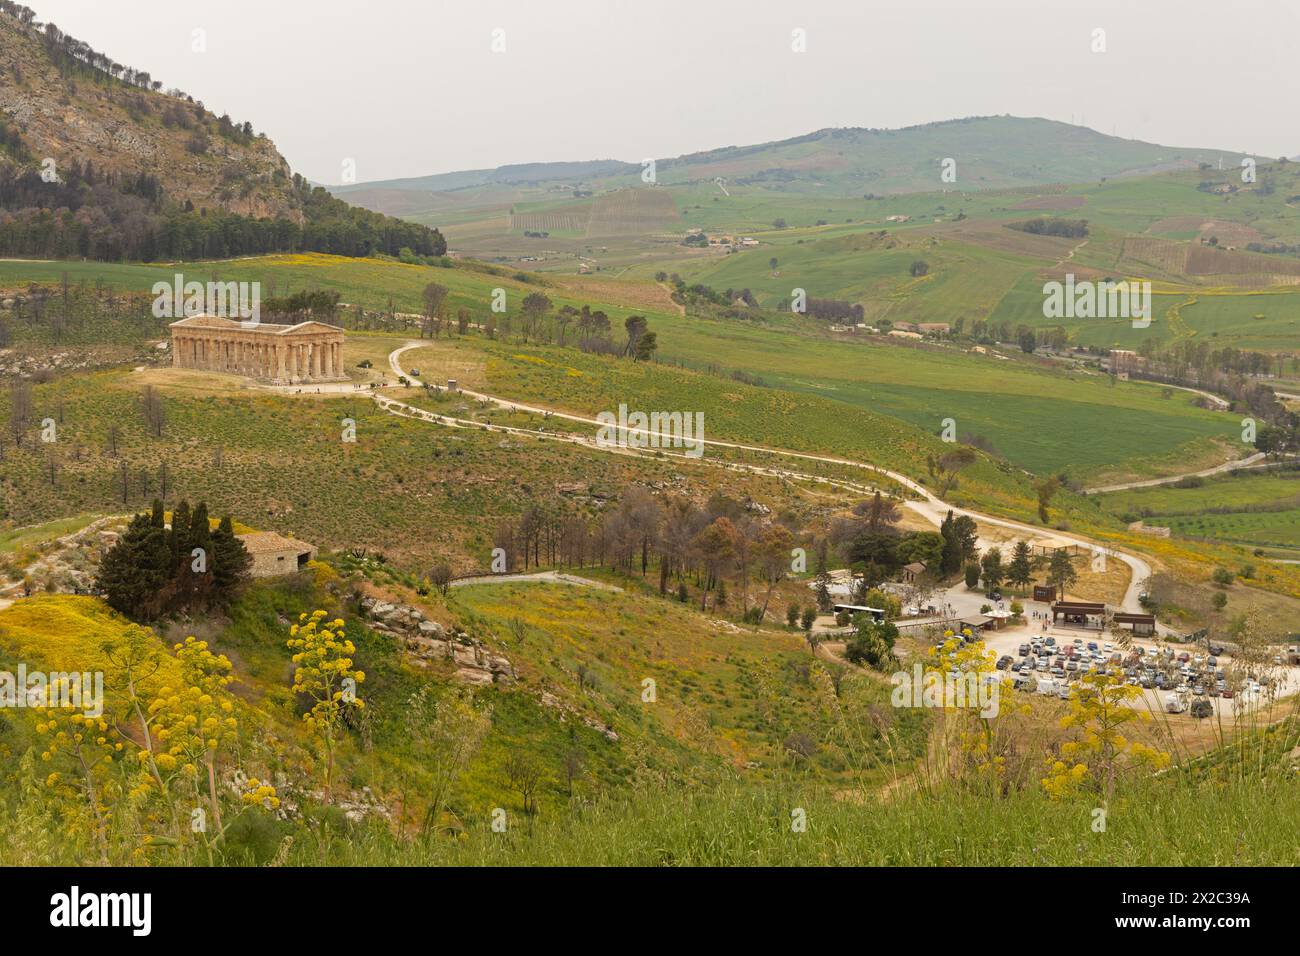 view to the temple of Segesta in Sicily Stock Photo